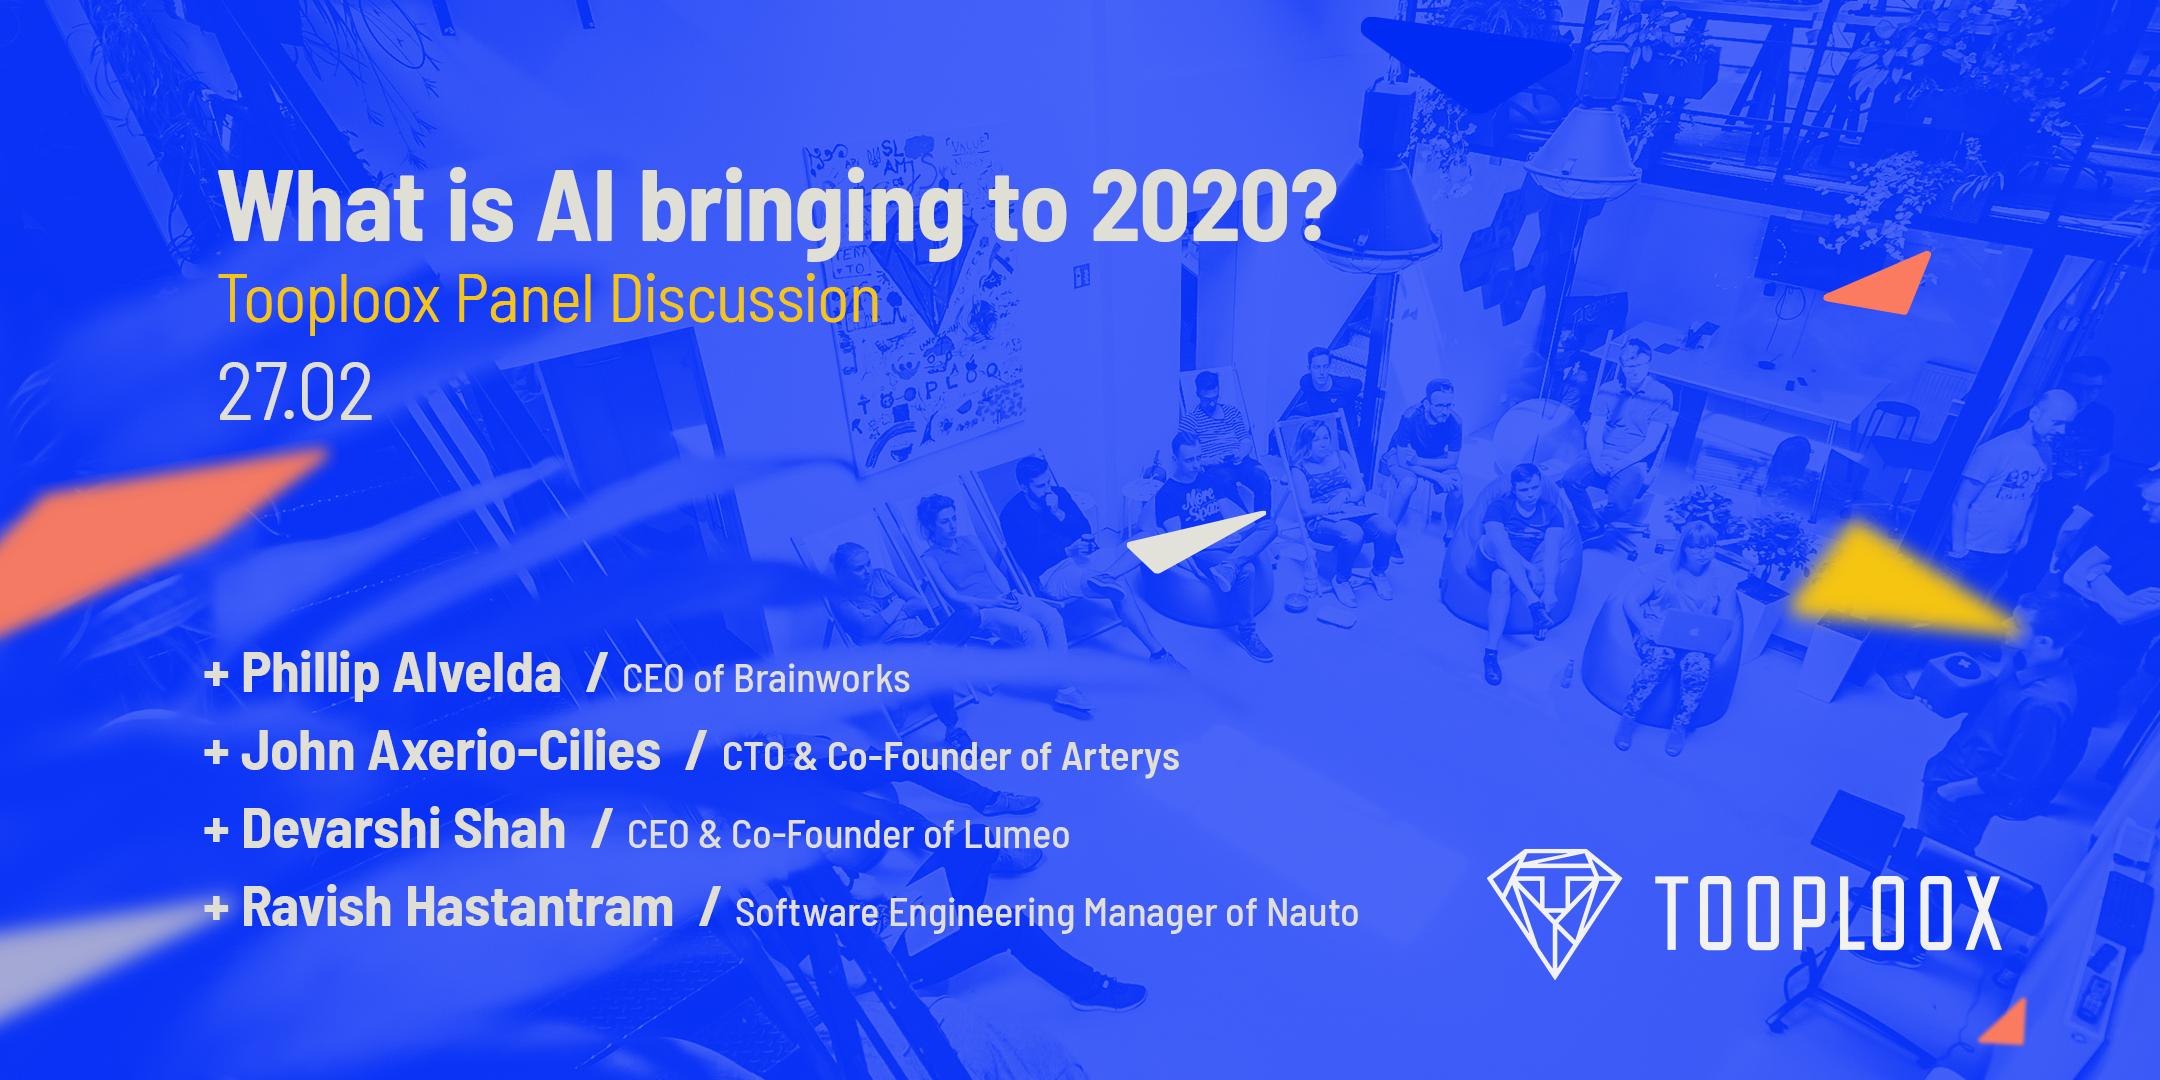 What is AI bringing to 2020? Panel discussion with experts from AI startups